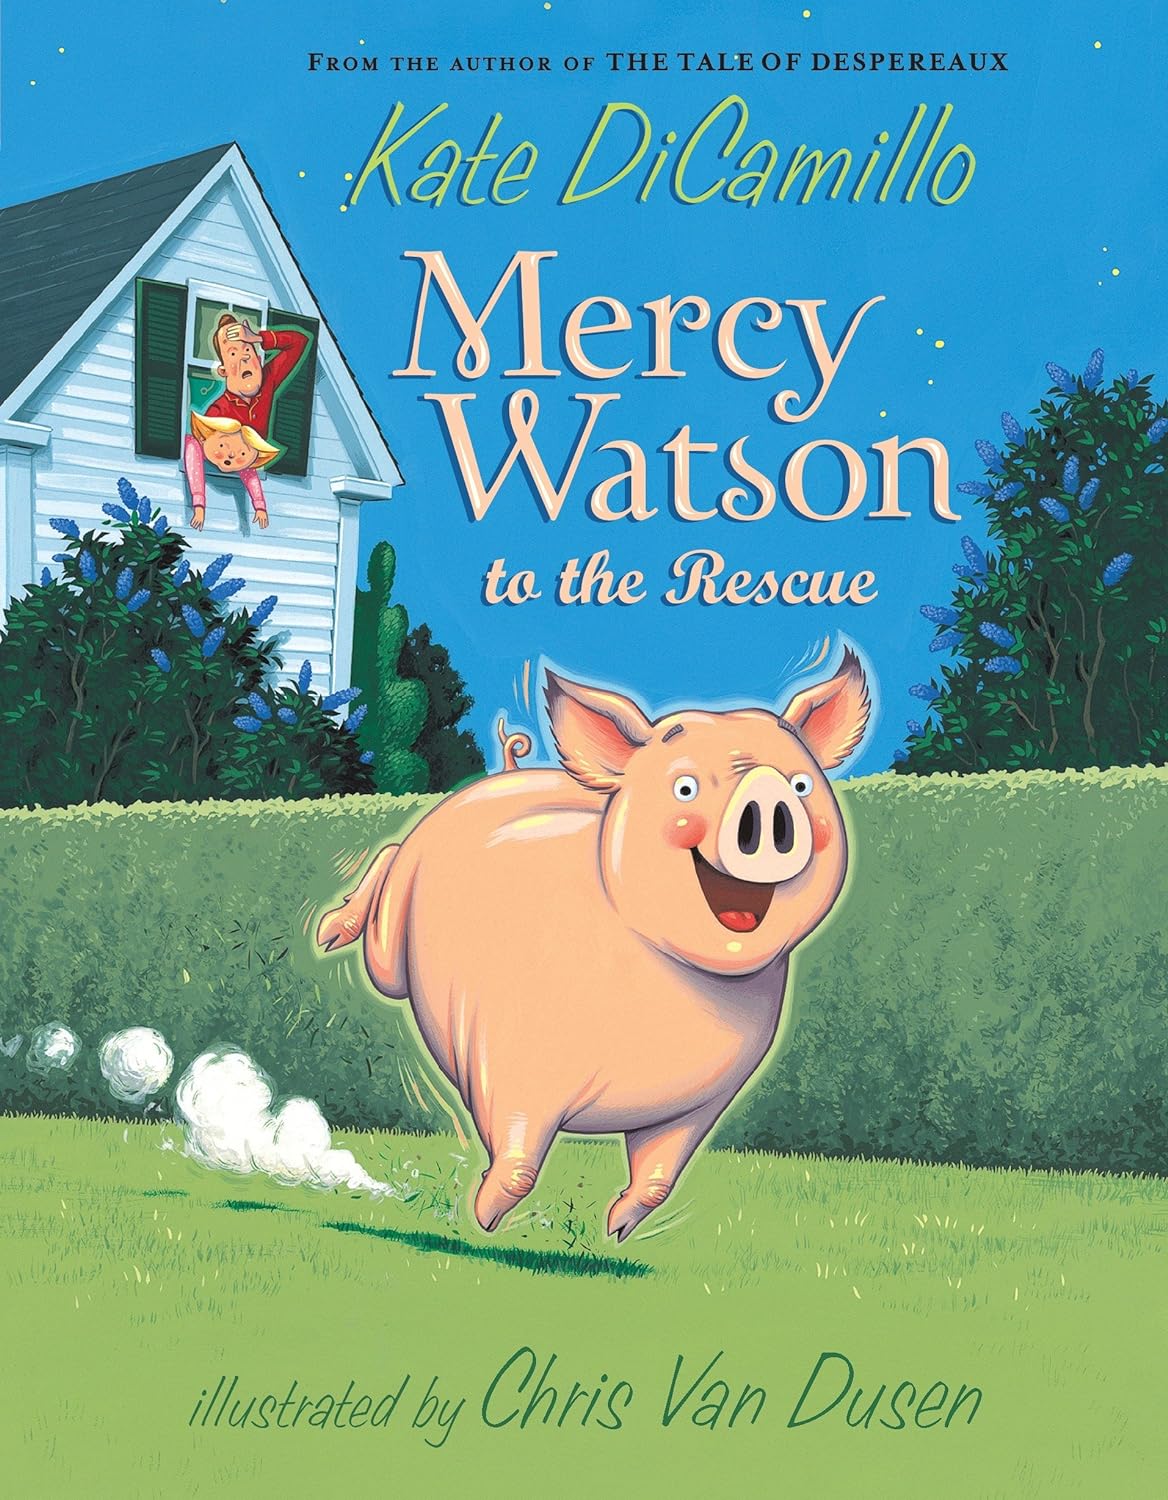 cartoon pig running in field with house in background